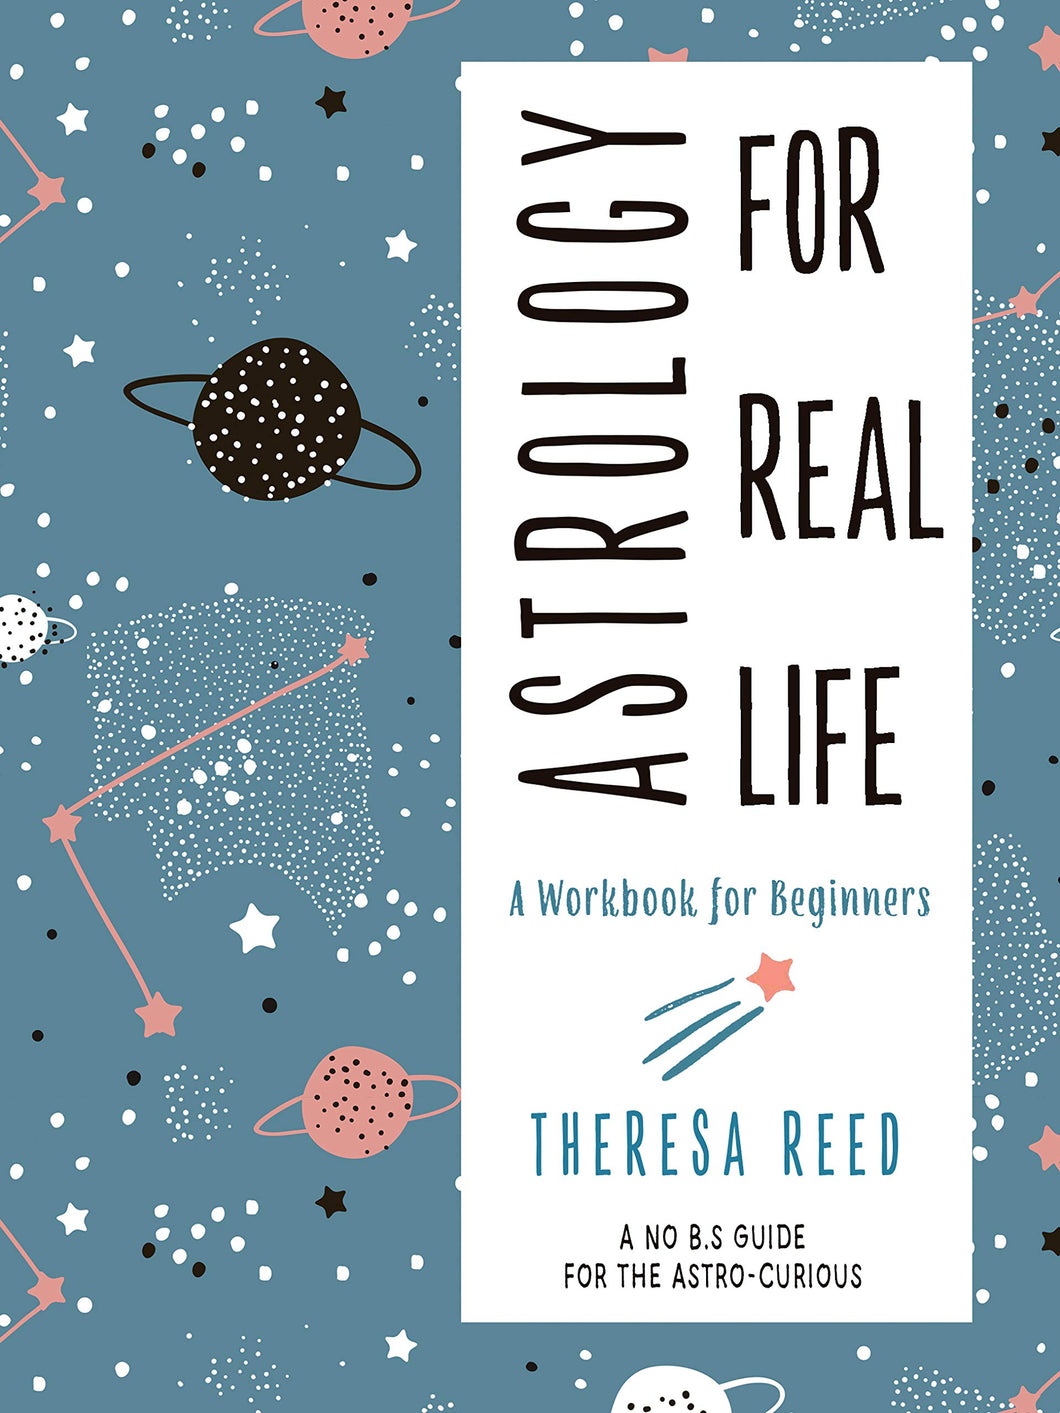 Astrology for Real Life (A No B.S. Guide for the Astro-Curious) by Theresa Reed